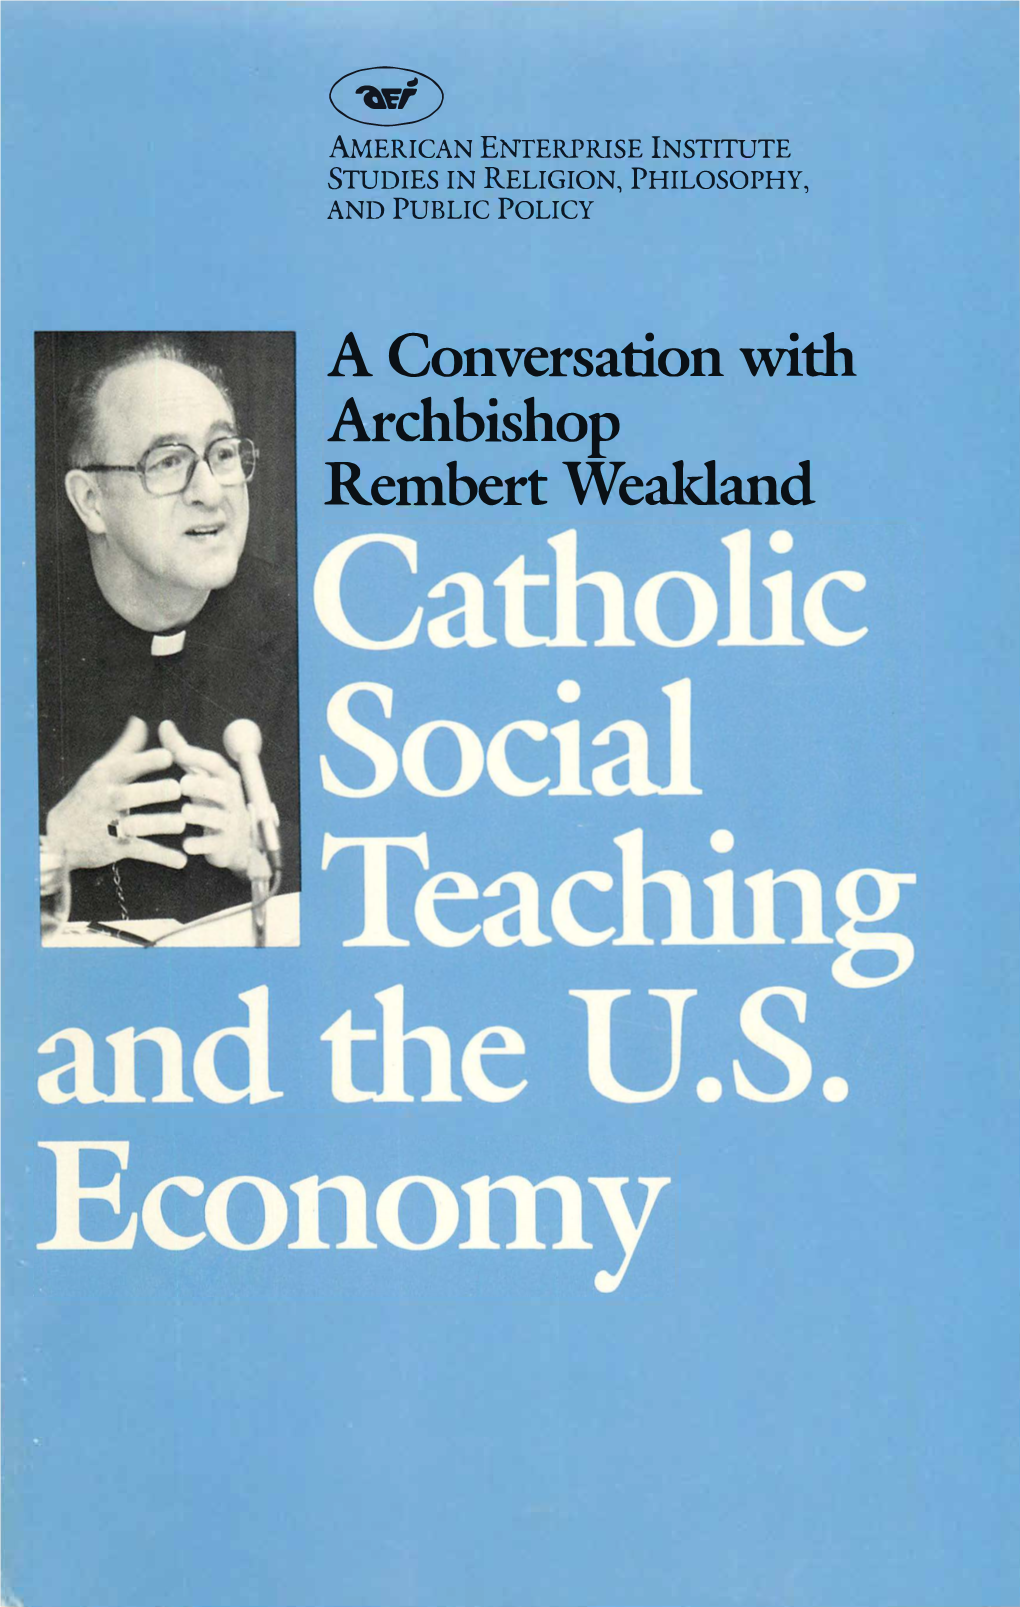 A Conversation with Archbishop Rembert Weakland Catholic Social Teaching and the U.S